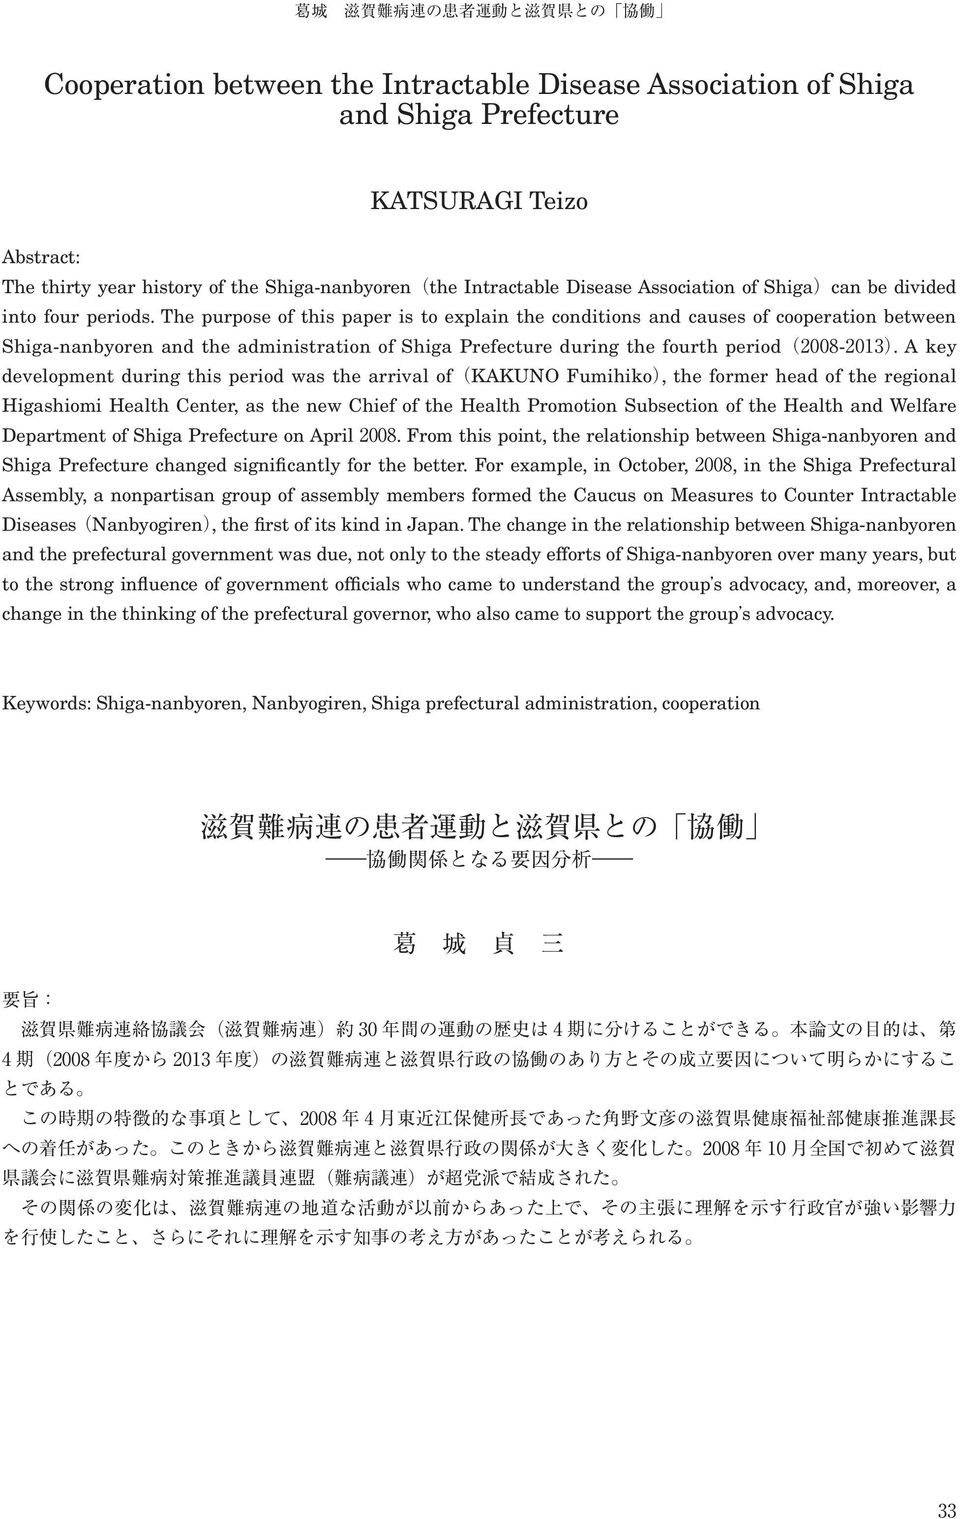 The purpose of this paper is to explain the conditions and causes of cooperation between Shiga-nanbyoren and the administration of Shiga Prefecture during the fourth period -.